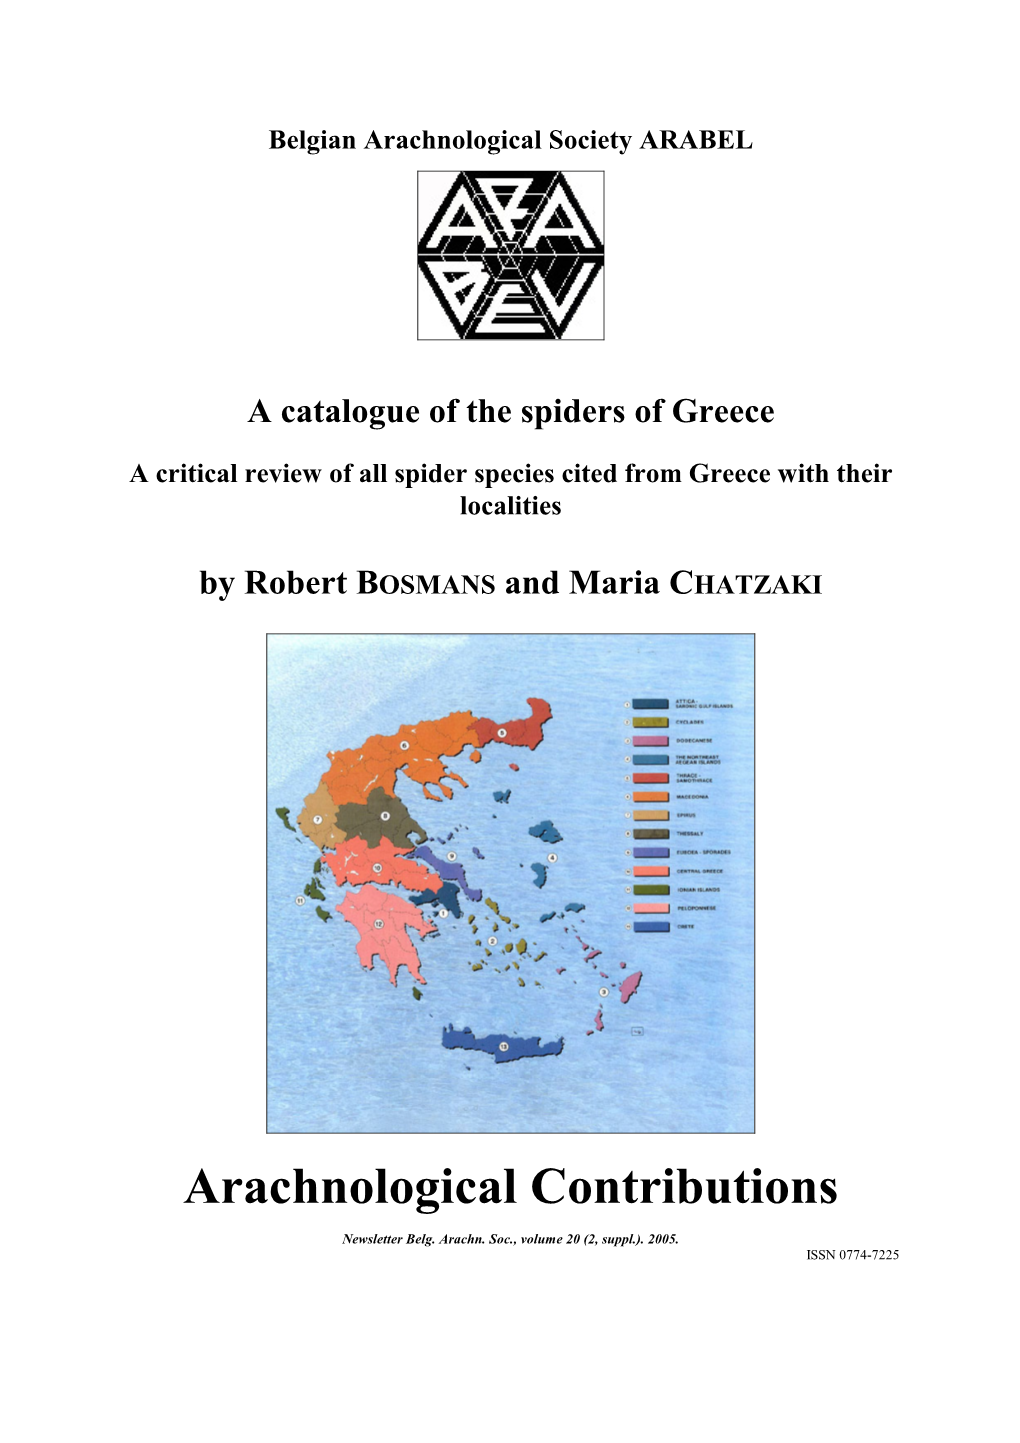 A Critical Review of All Spider Species Cited from Greece with Their Localities